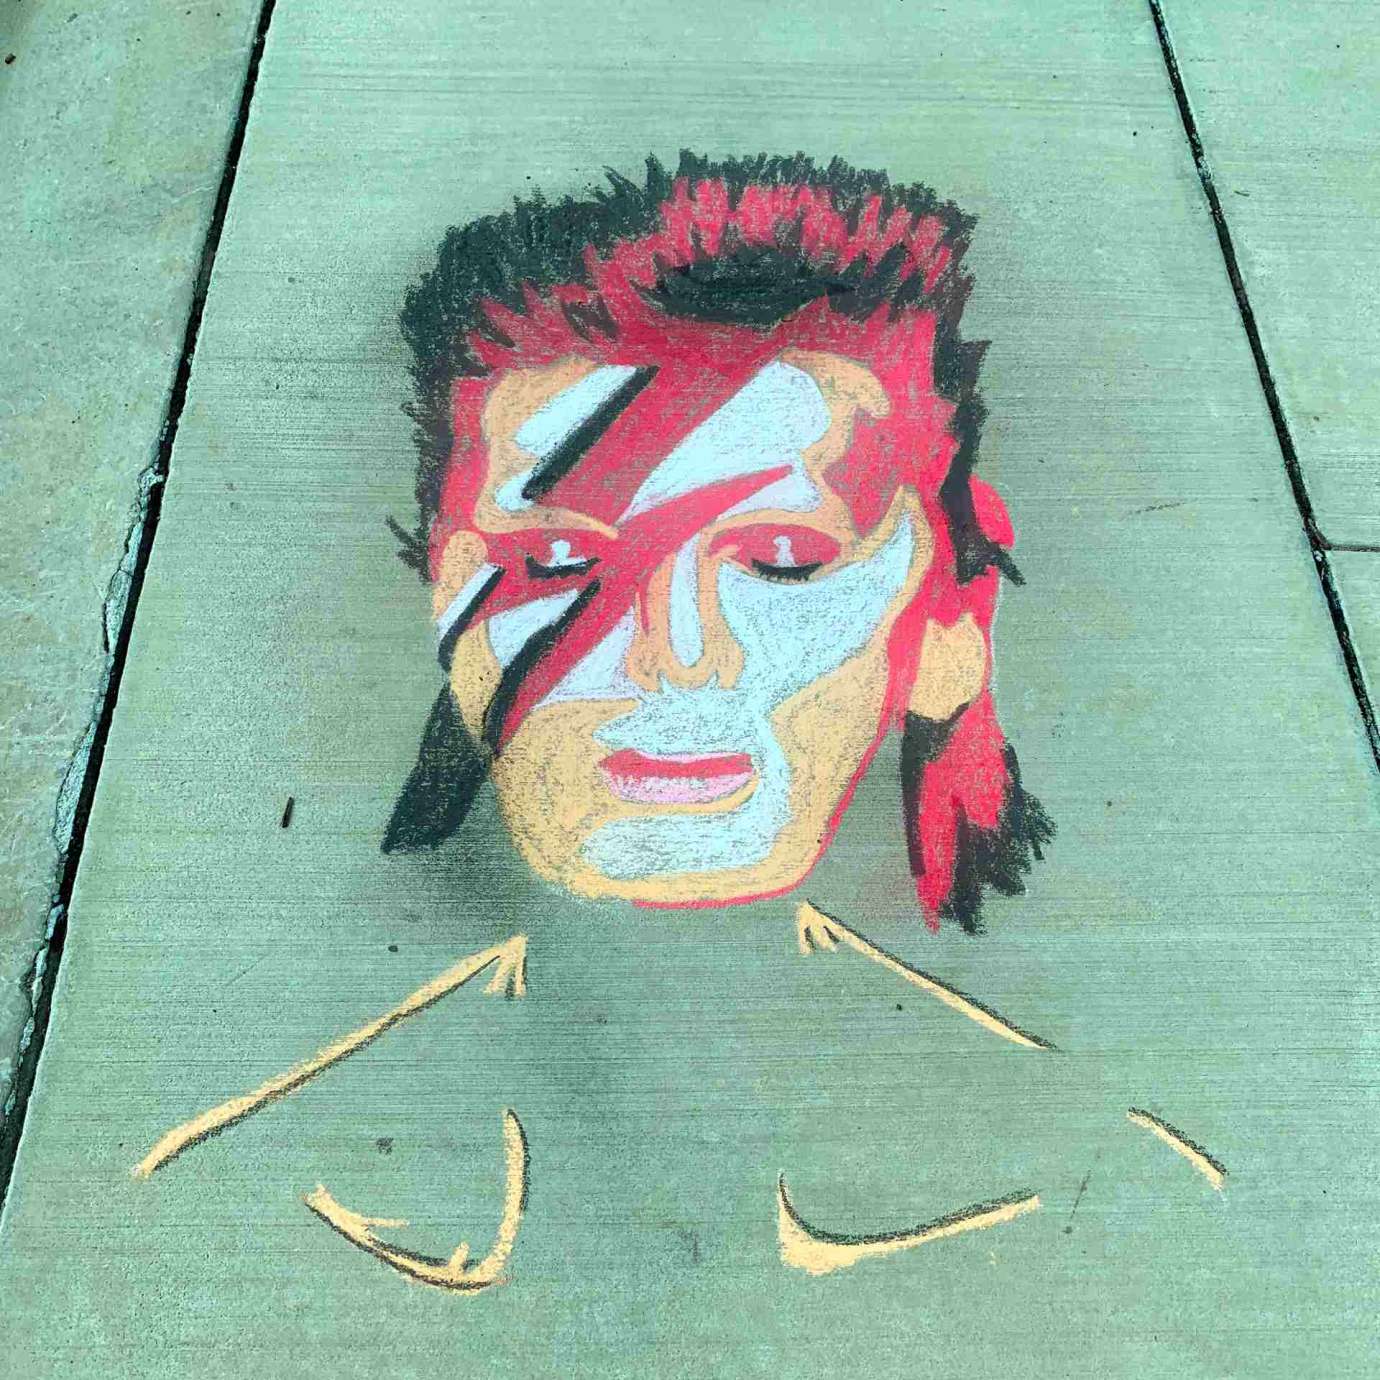 A sidewalk chalk drawing of David Bowie with red lightning strike across face